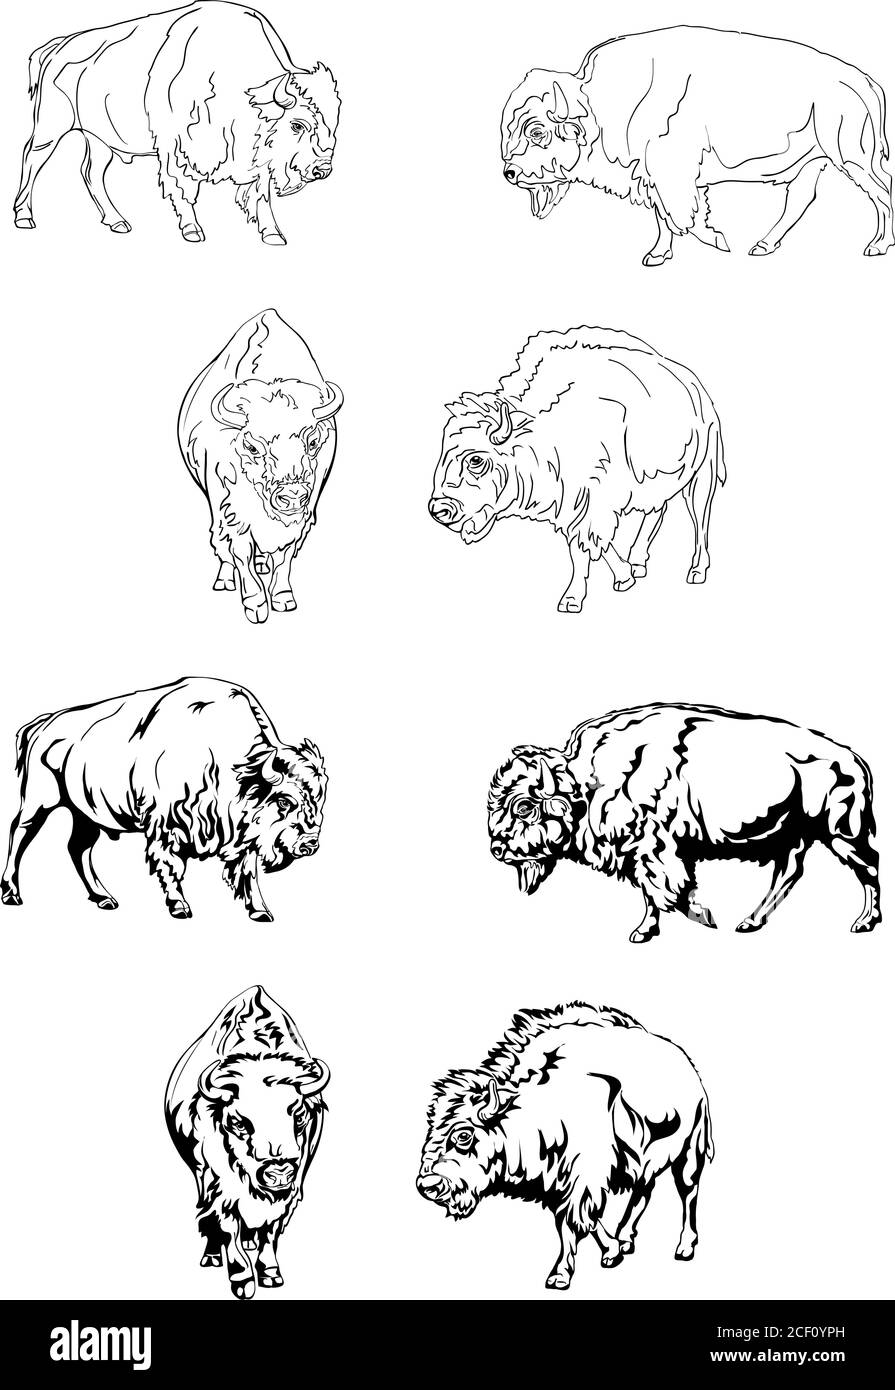 How to draw animals. Step by step drawing lessons APK for Android - Download